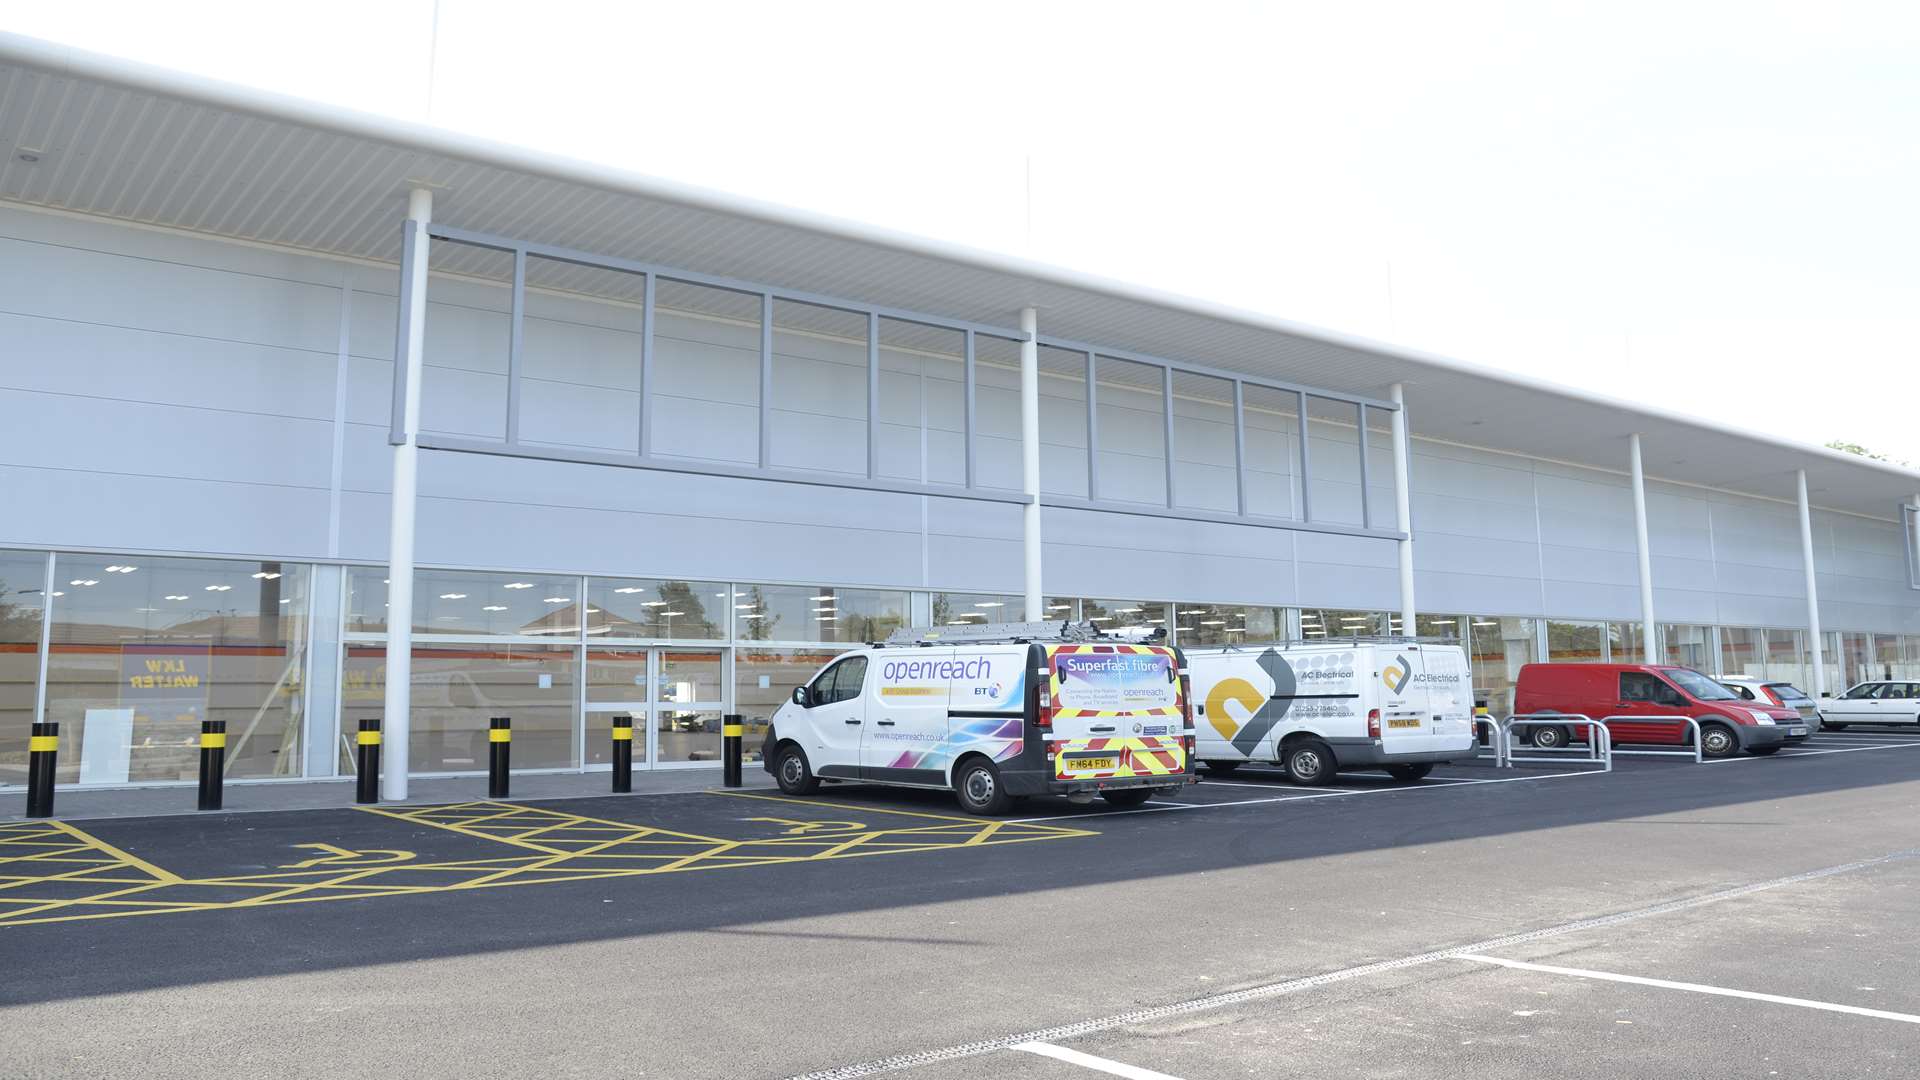 The B&M Bargain Store building at the White Cliffs Retail Park, Whitfield which will open on Saturday.